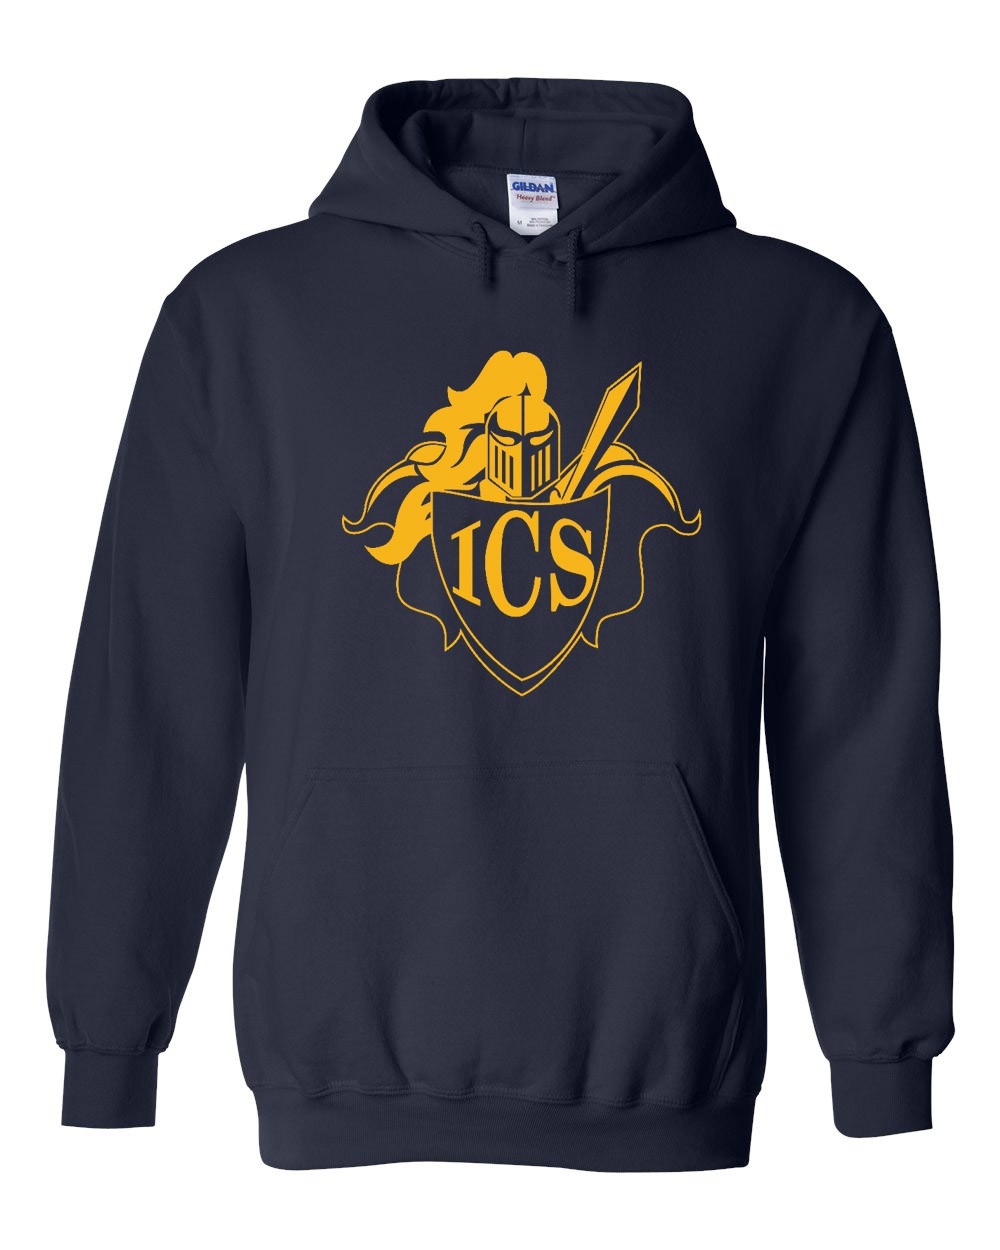 ICS Spirit Pullover Hoodie w/ Gold Logo - Please allow 2-3 Weeks for Delivery